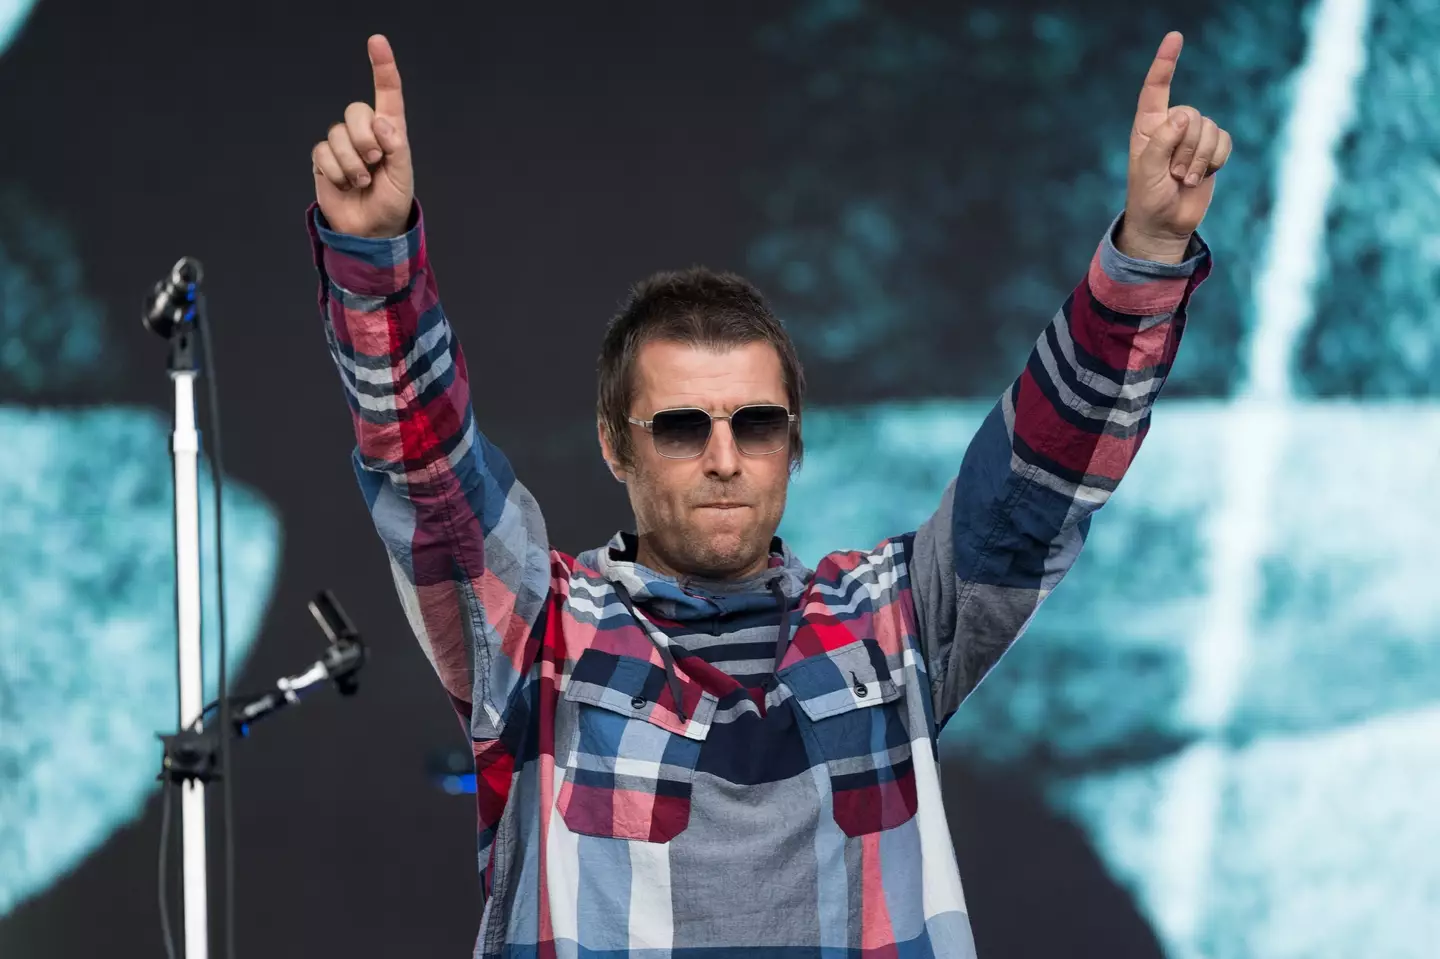 The singer explained she got drunk with Liam Gallagher before they ended up having sex on the way to Tokyo (Ian Gavan/Getty Images)